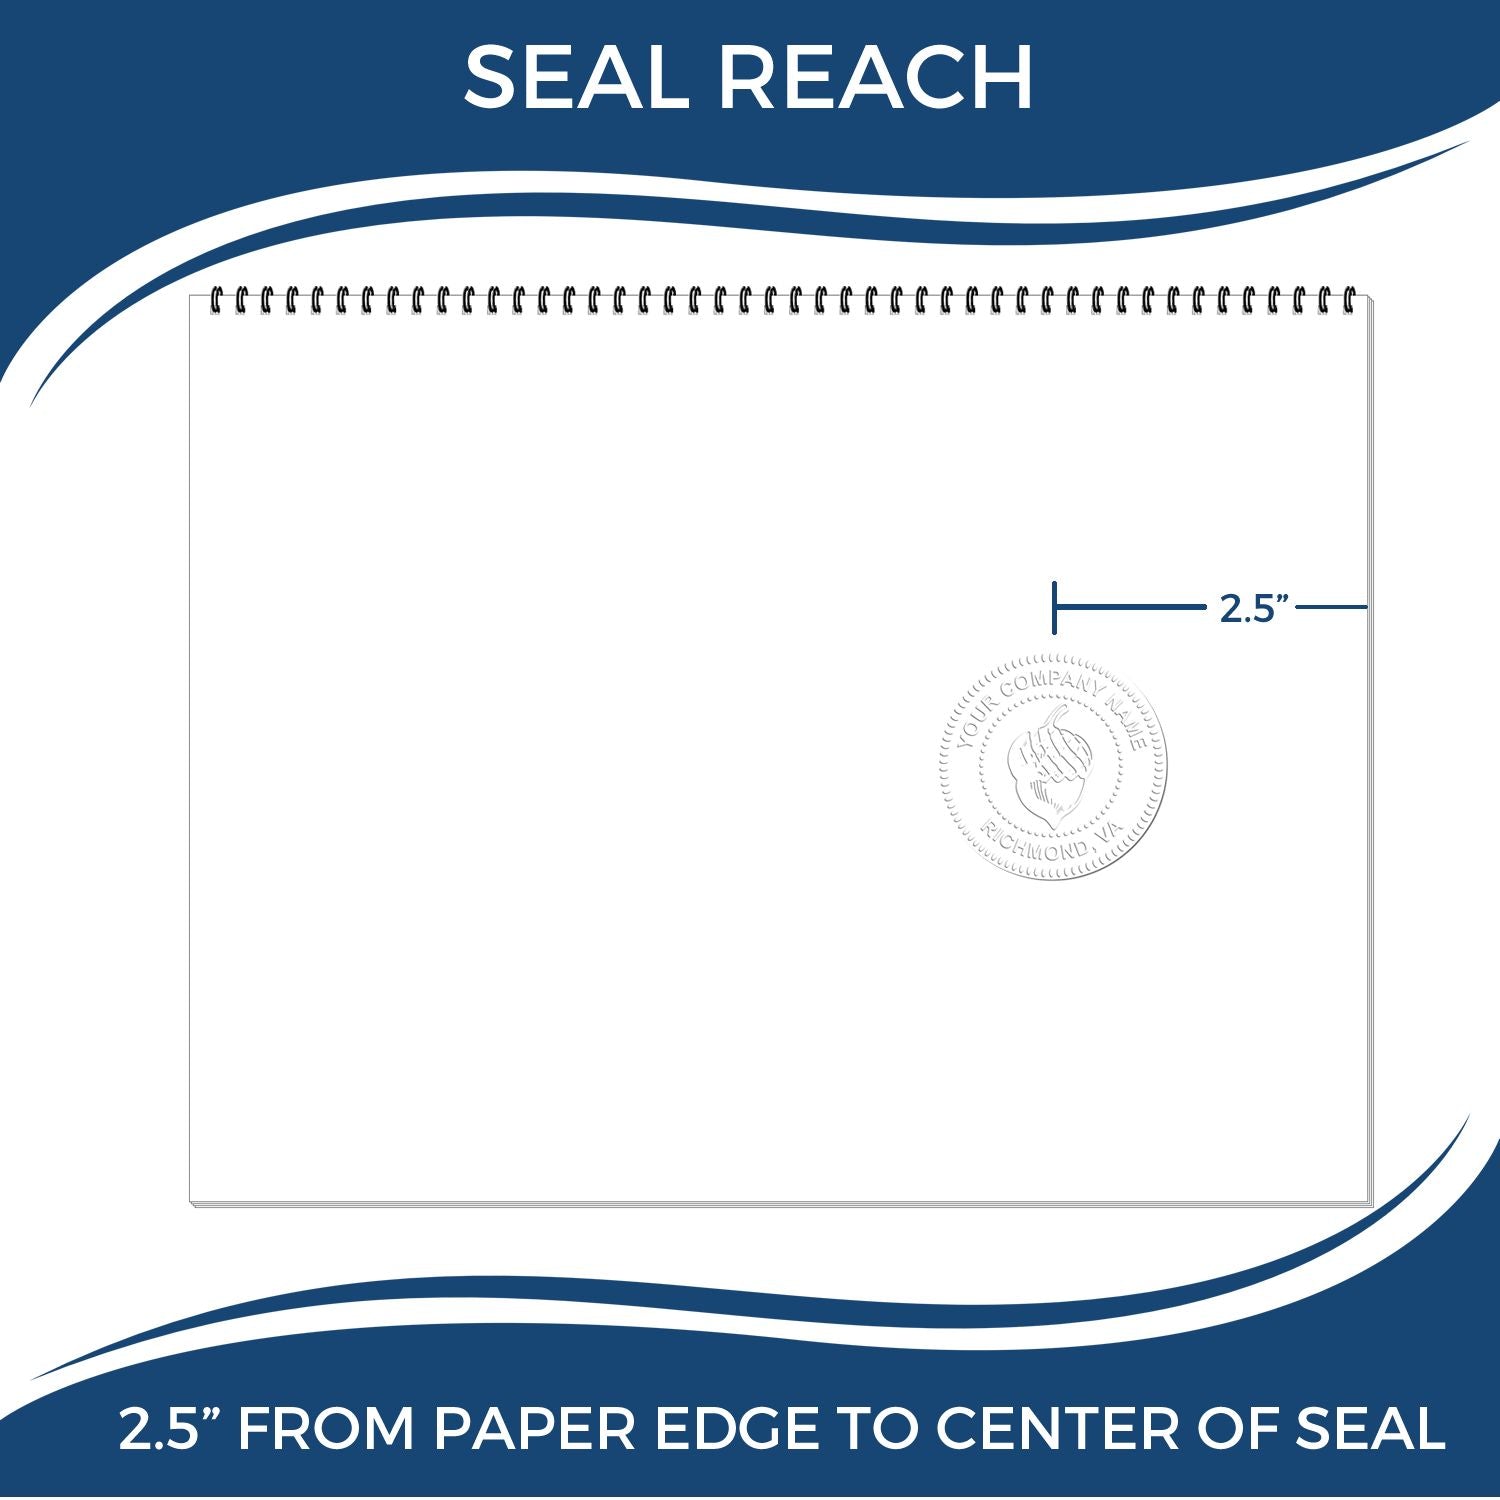 An infographic showing the seal reach which is represented by a ruler and a miniature seal image of the Heavy Duty Cast Iron Maryland Architect Embosser